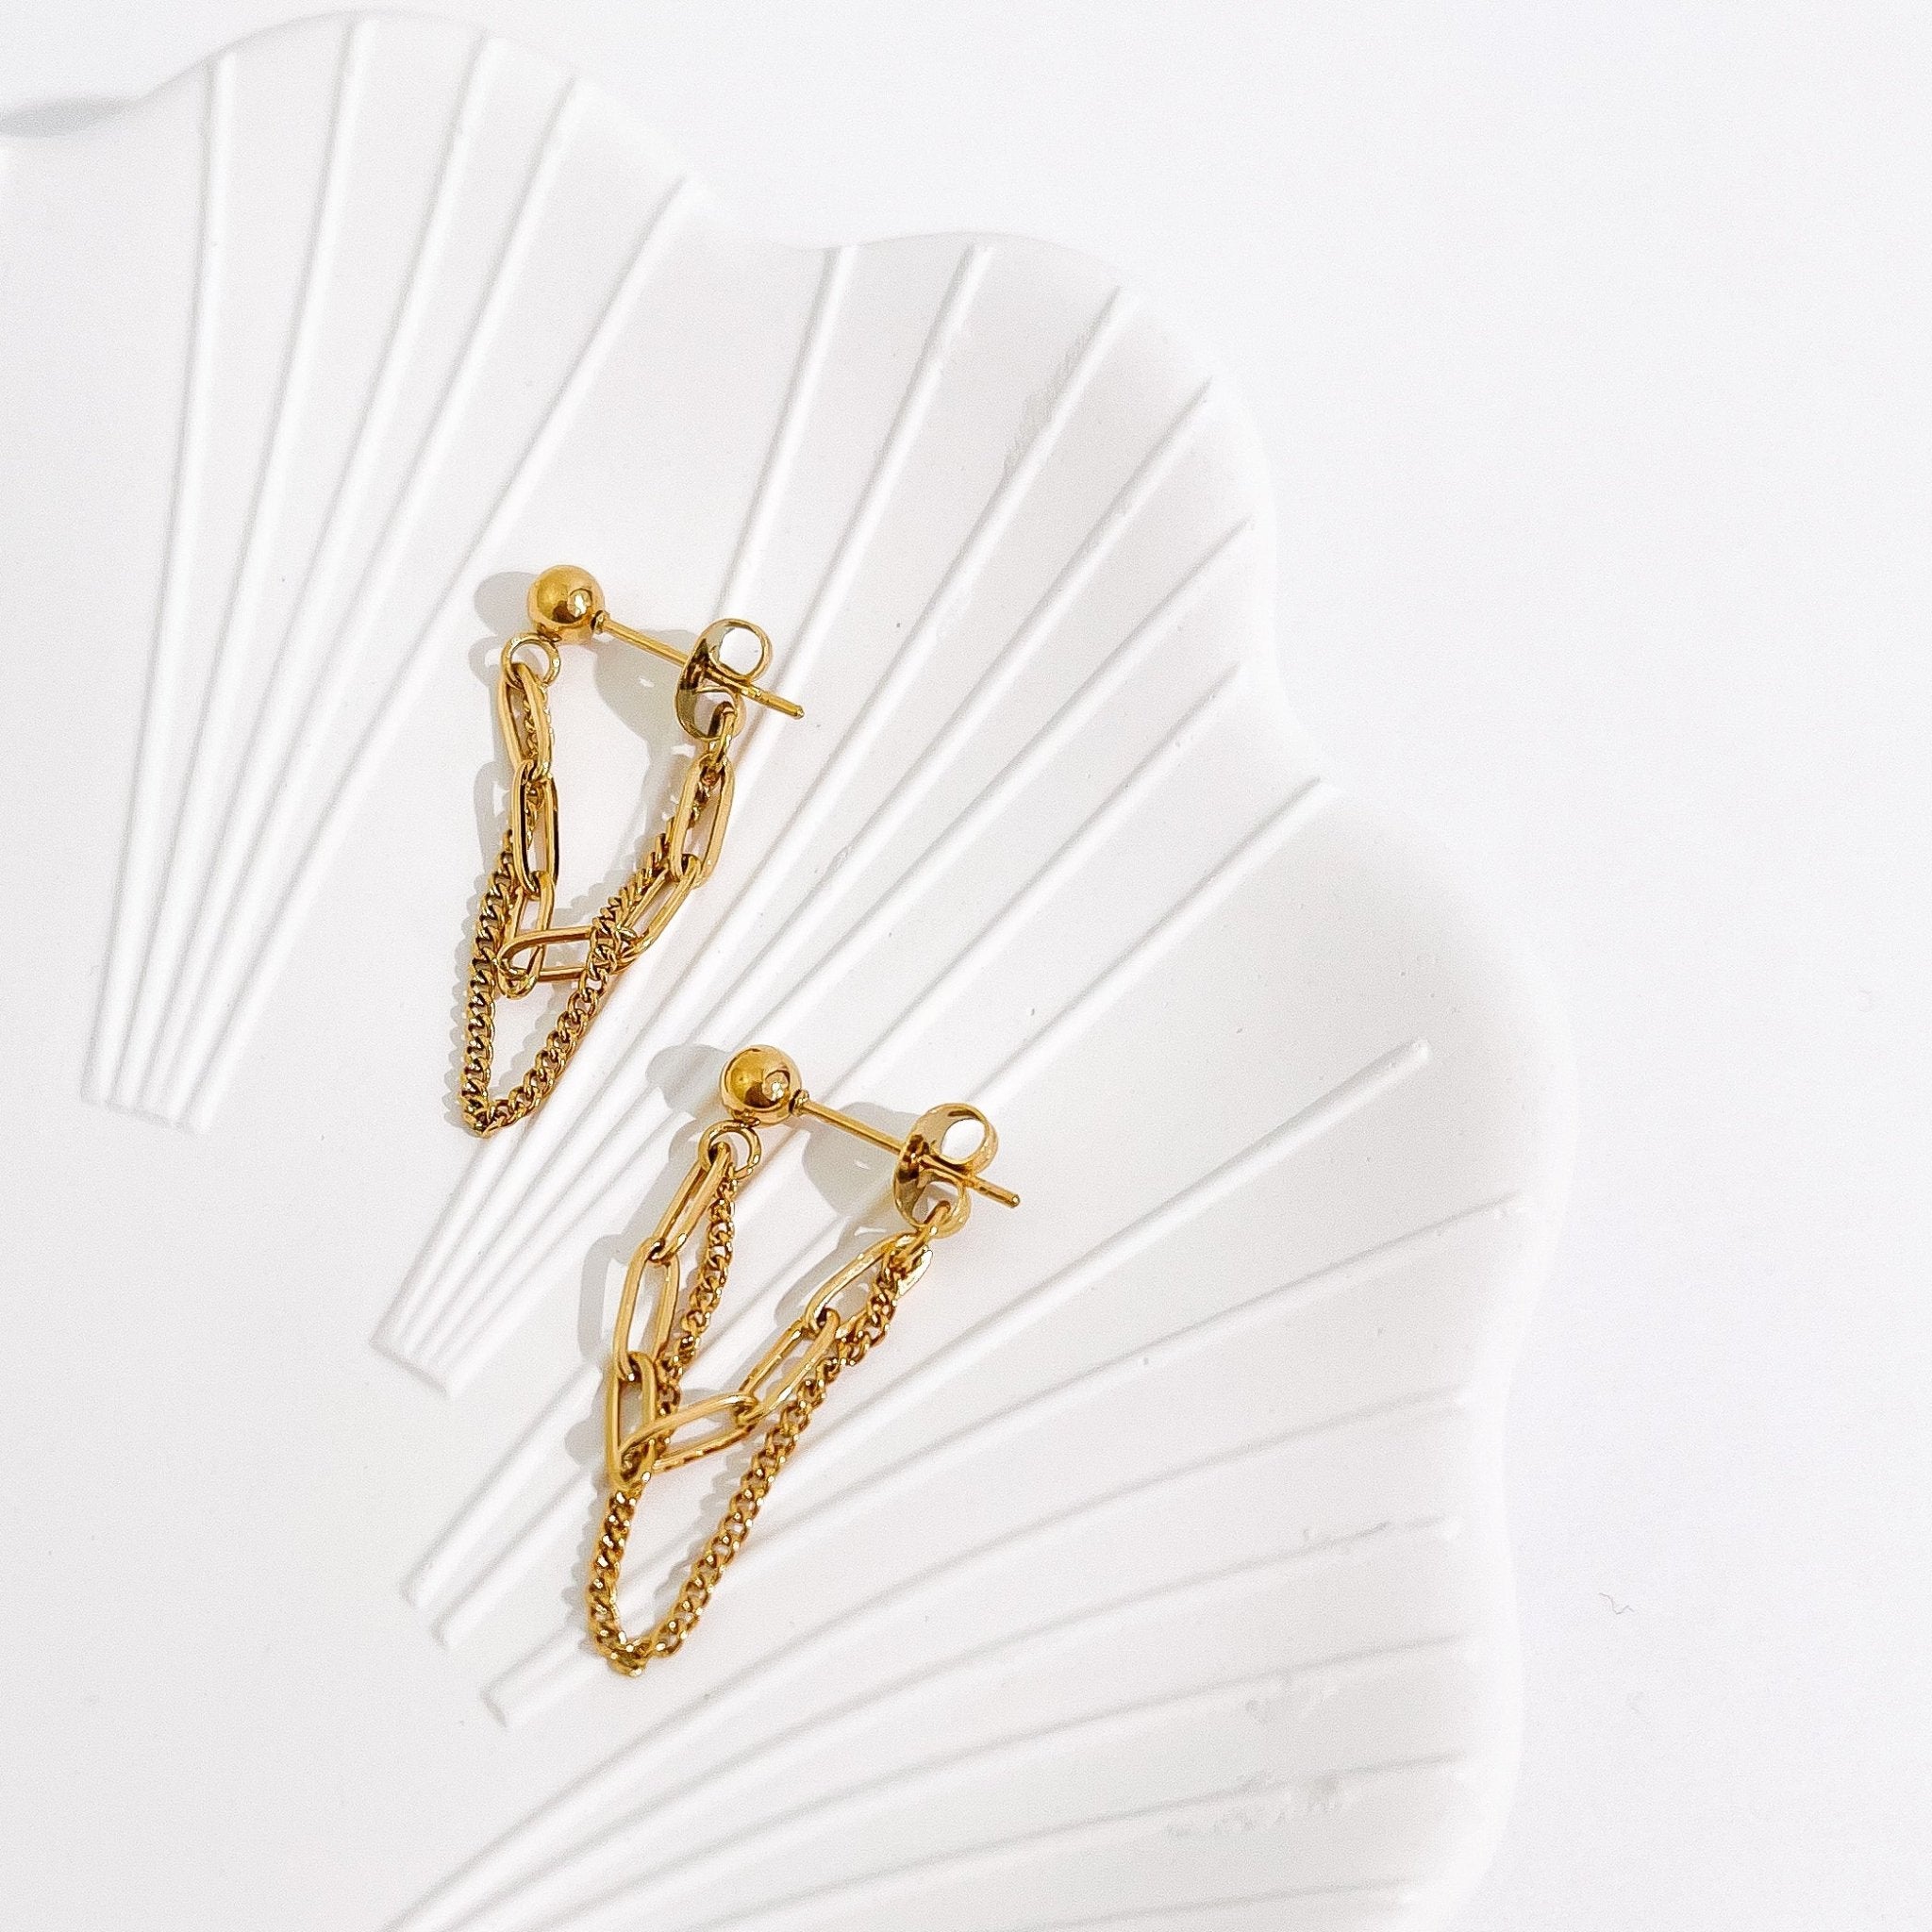 Cynthia Gold Chains Earrings - Flaire & Co.